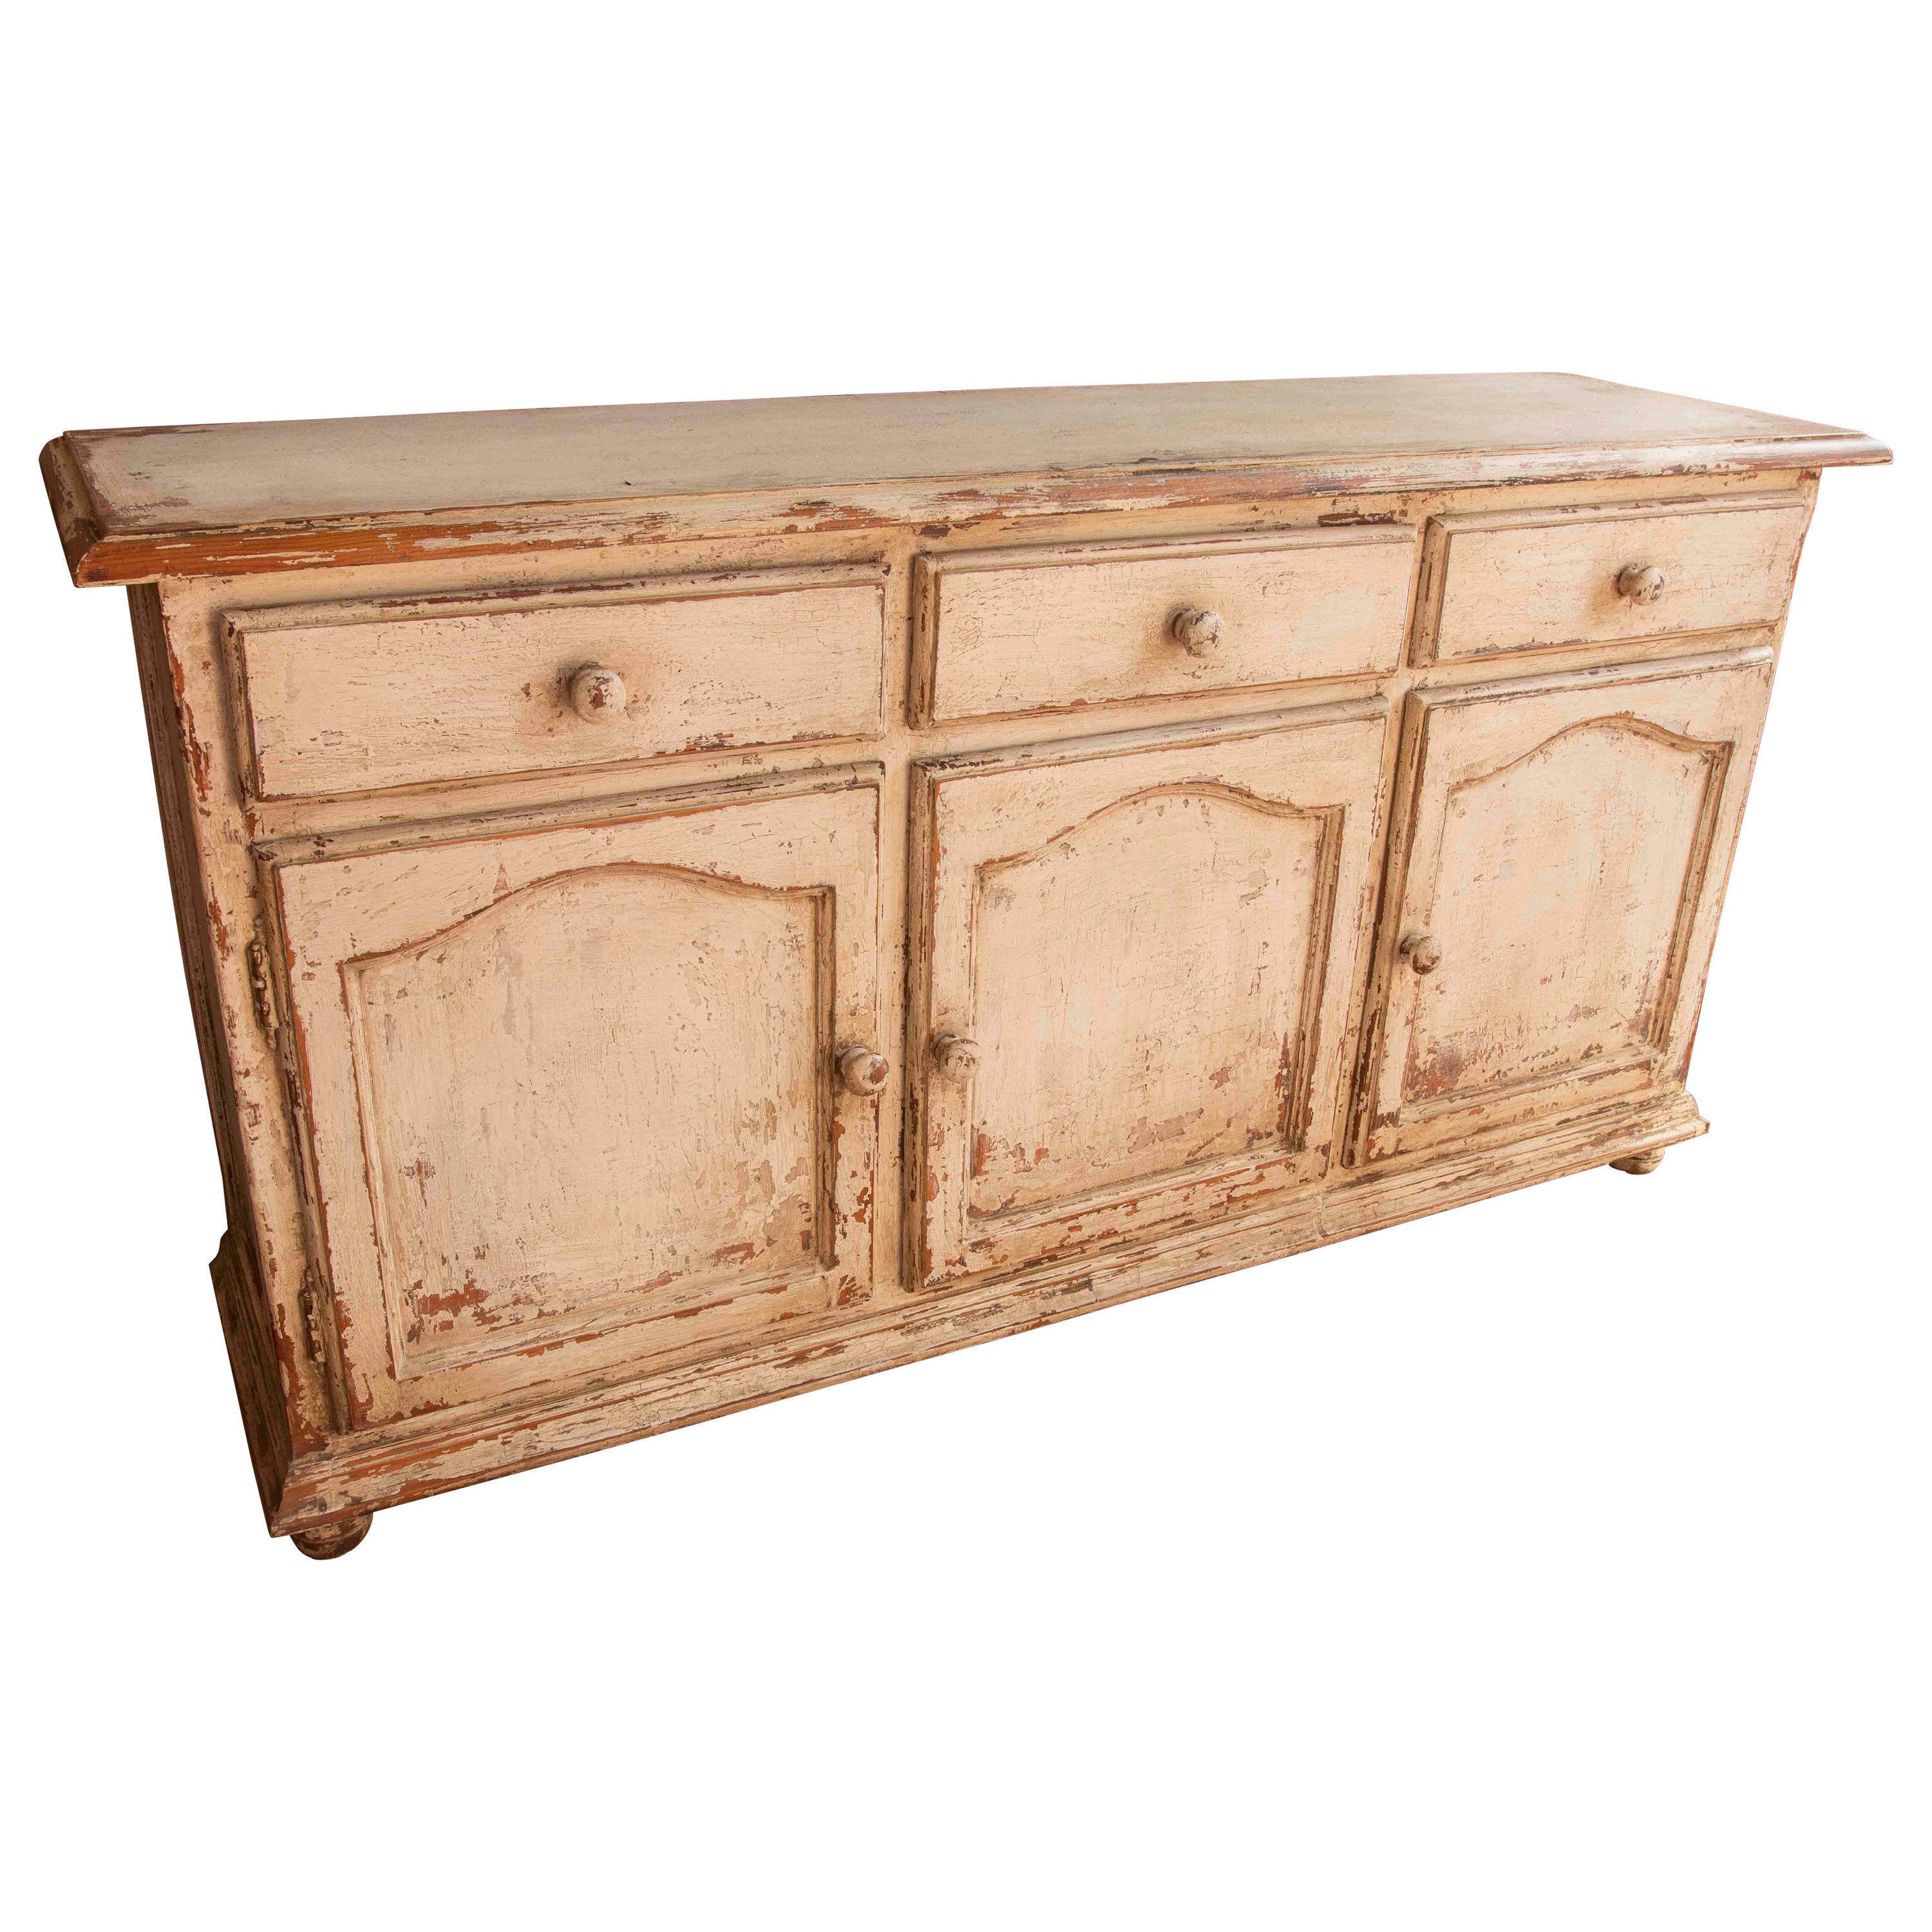 Wooden Sideboard with Doors and Drawers Painted in Antique White